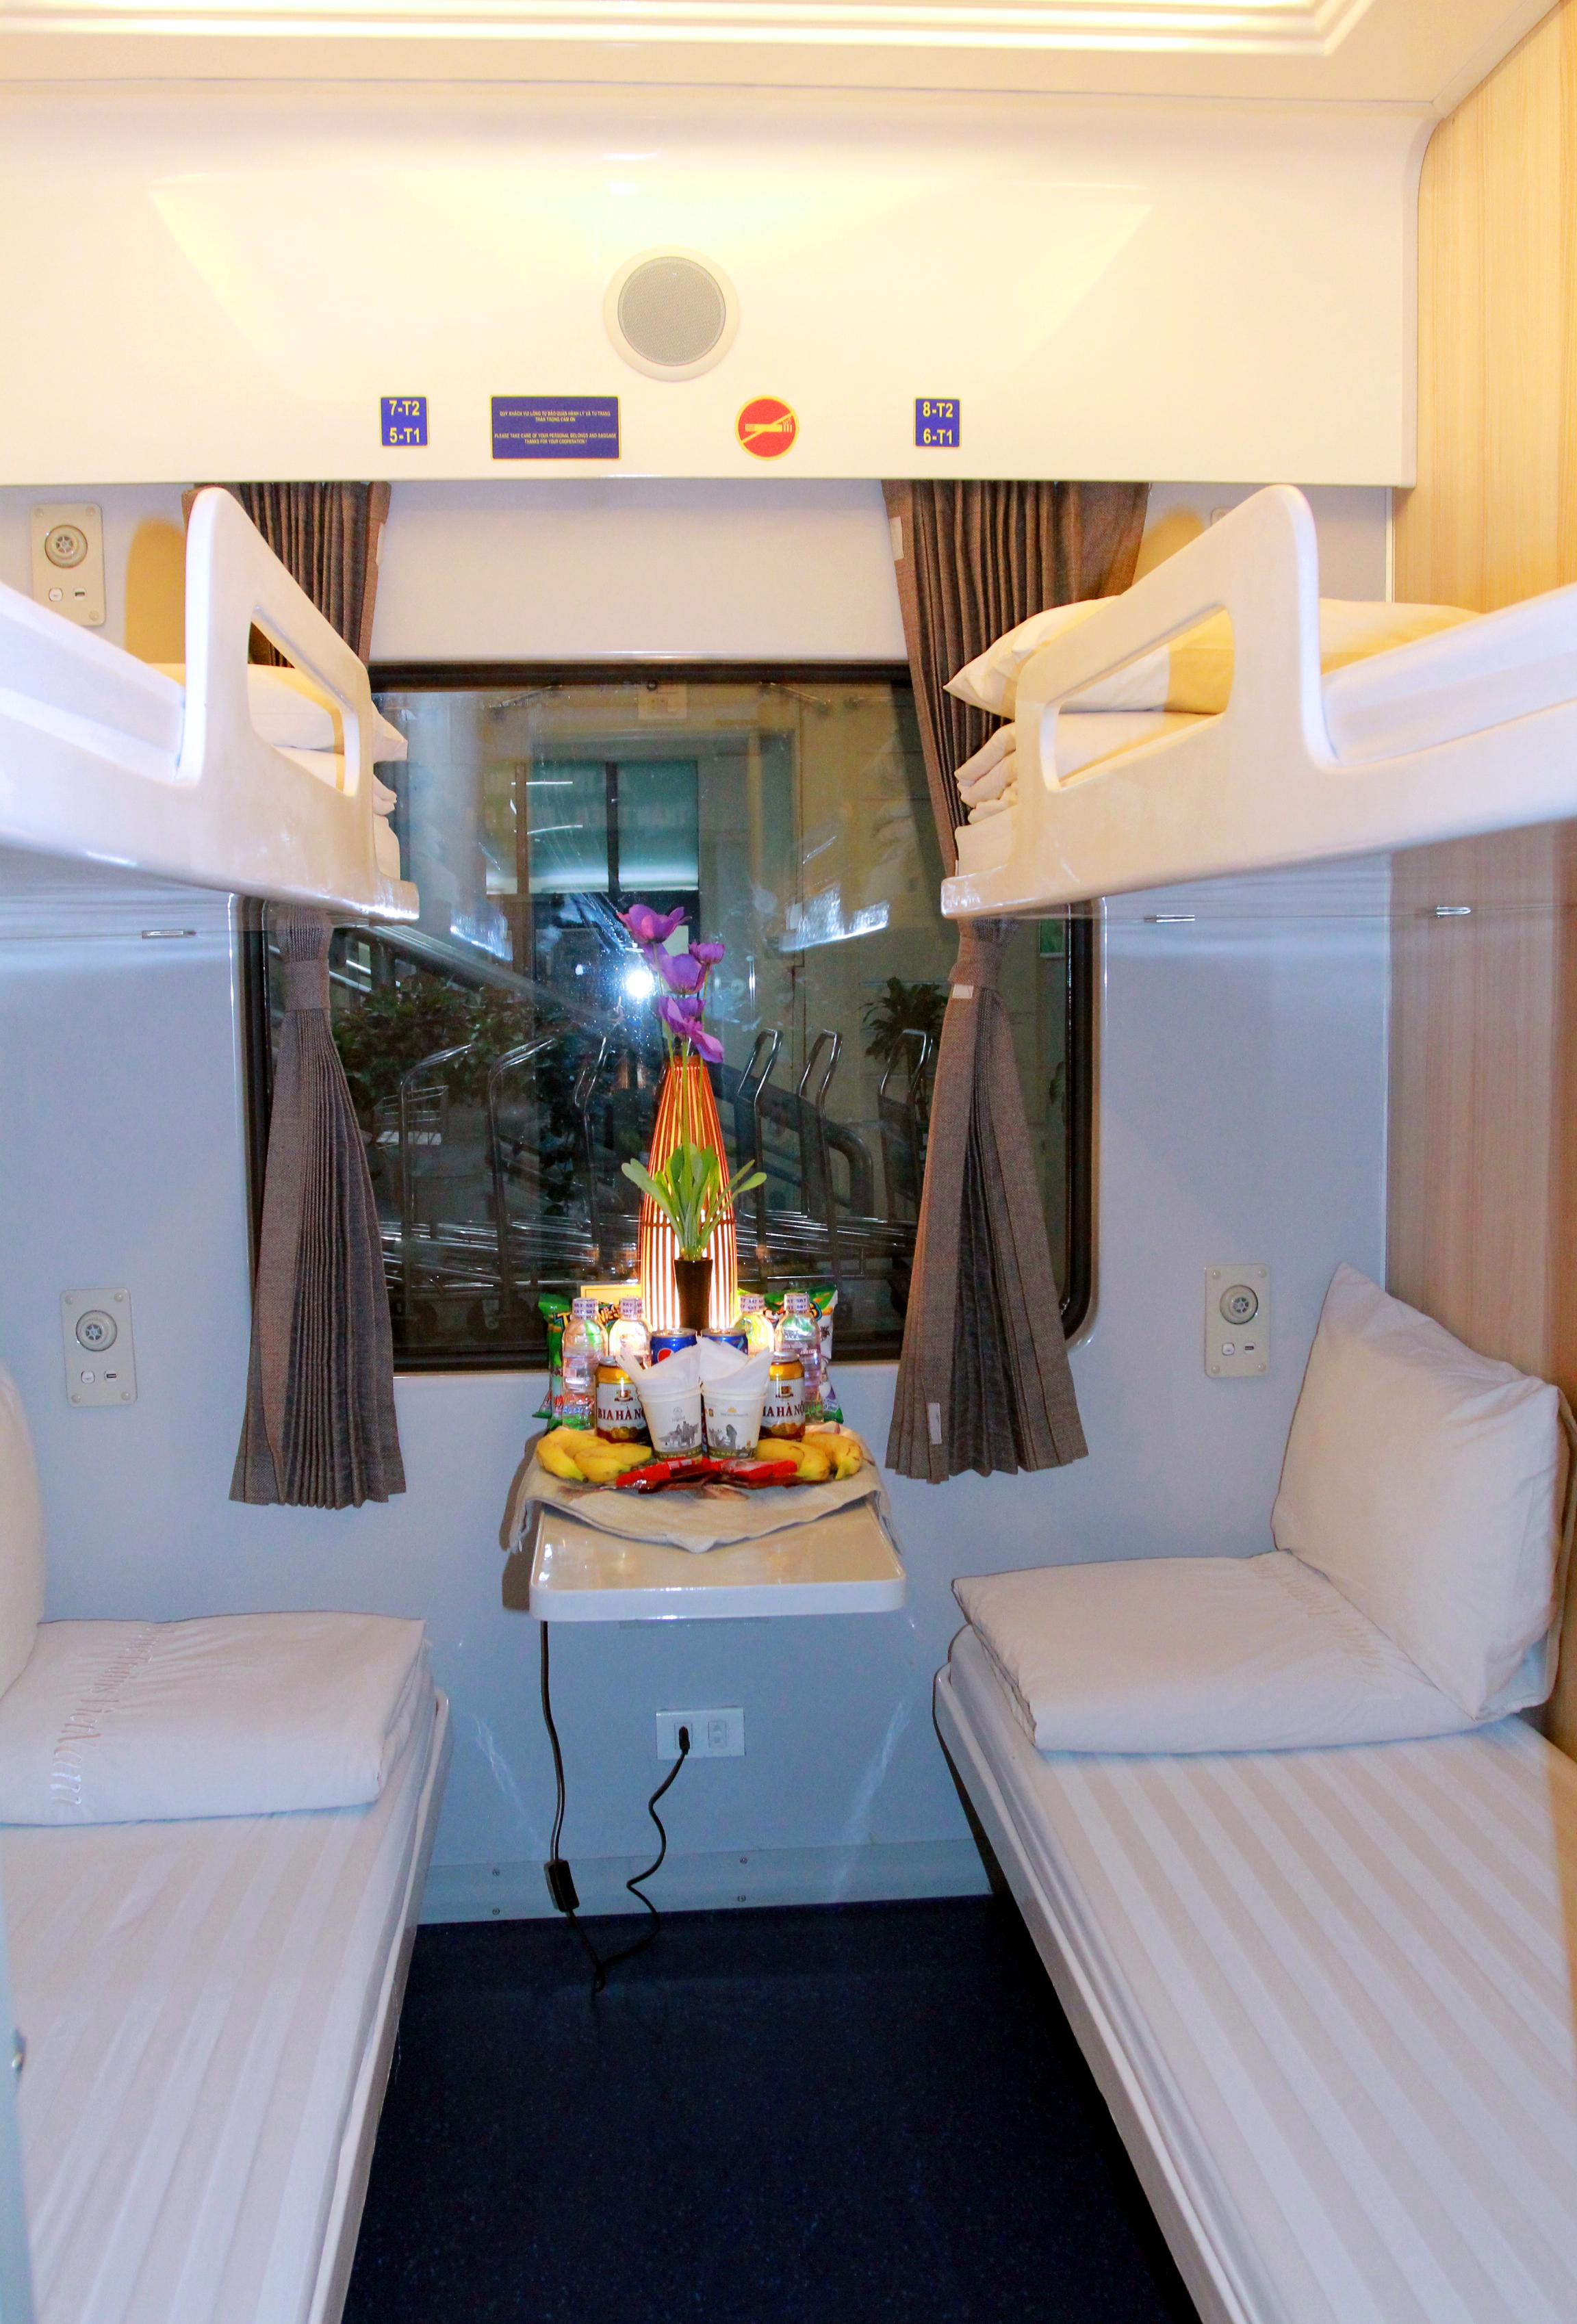 Ninh Binh - Dong Hoi on SE3 (21h44 - 5h45) (Deluxe 4 Berths Cabin, One Way)